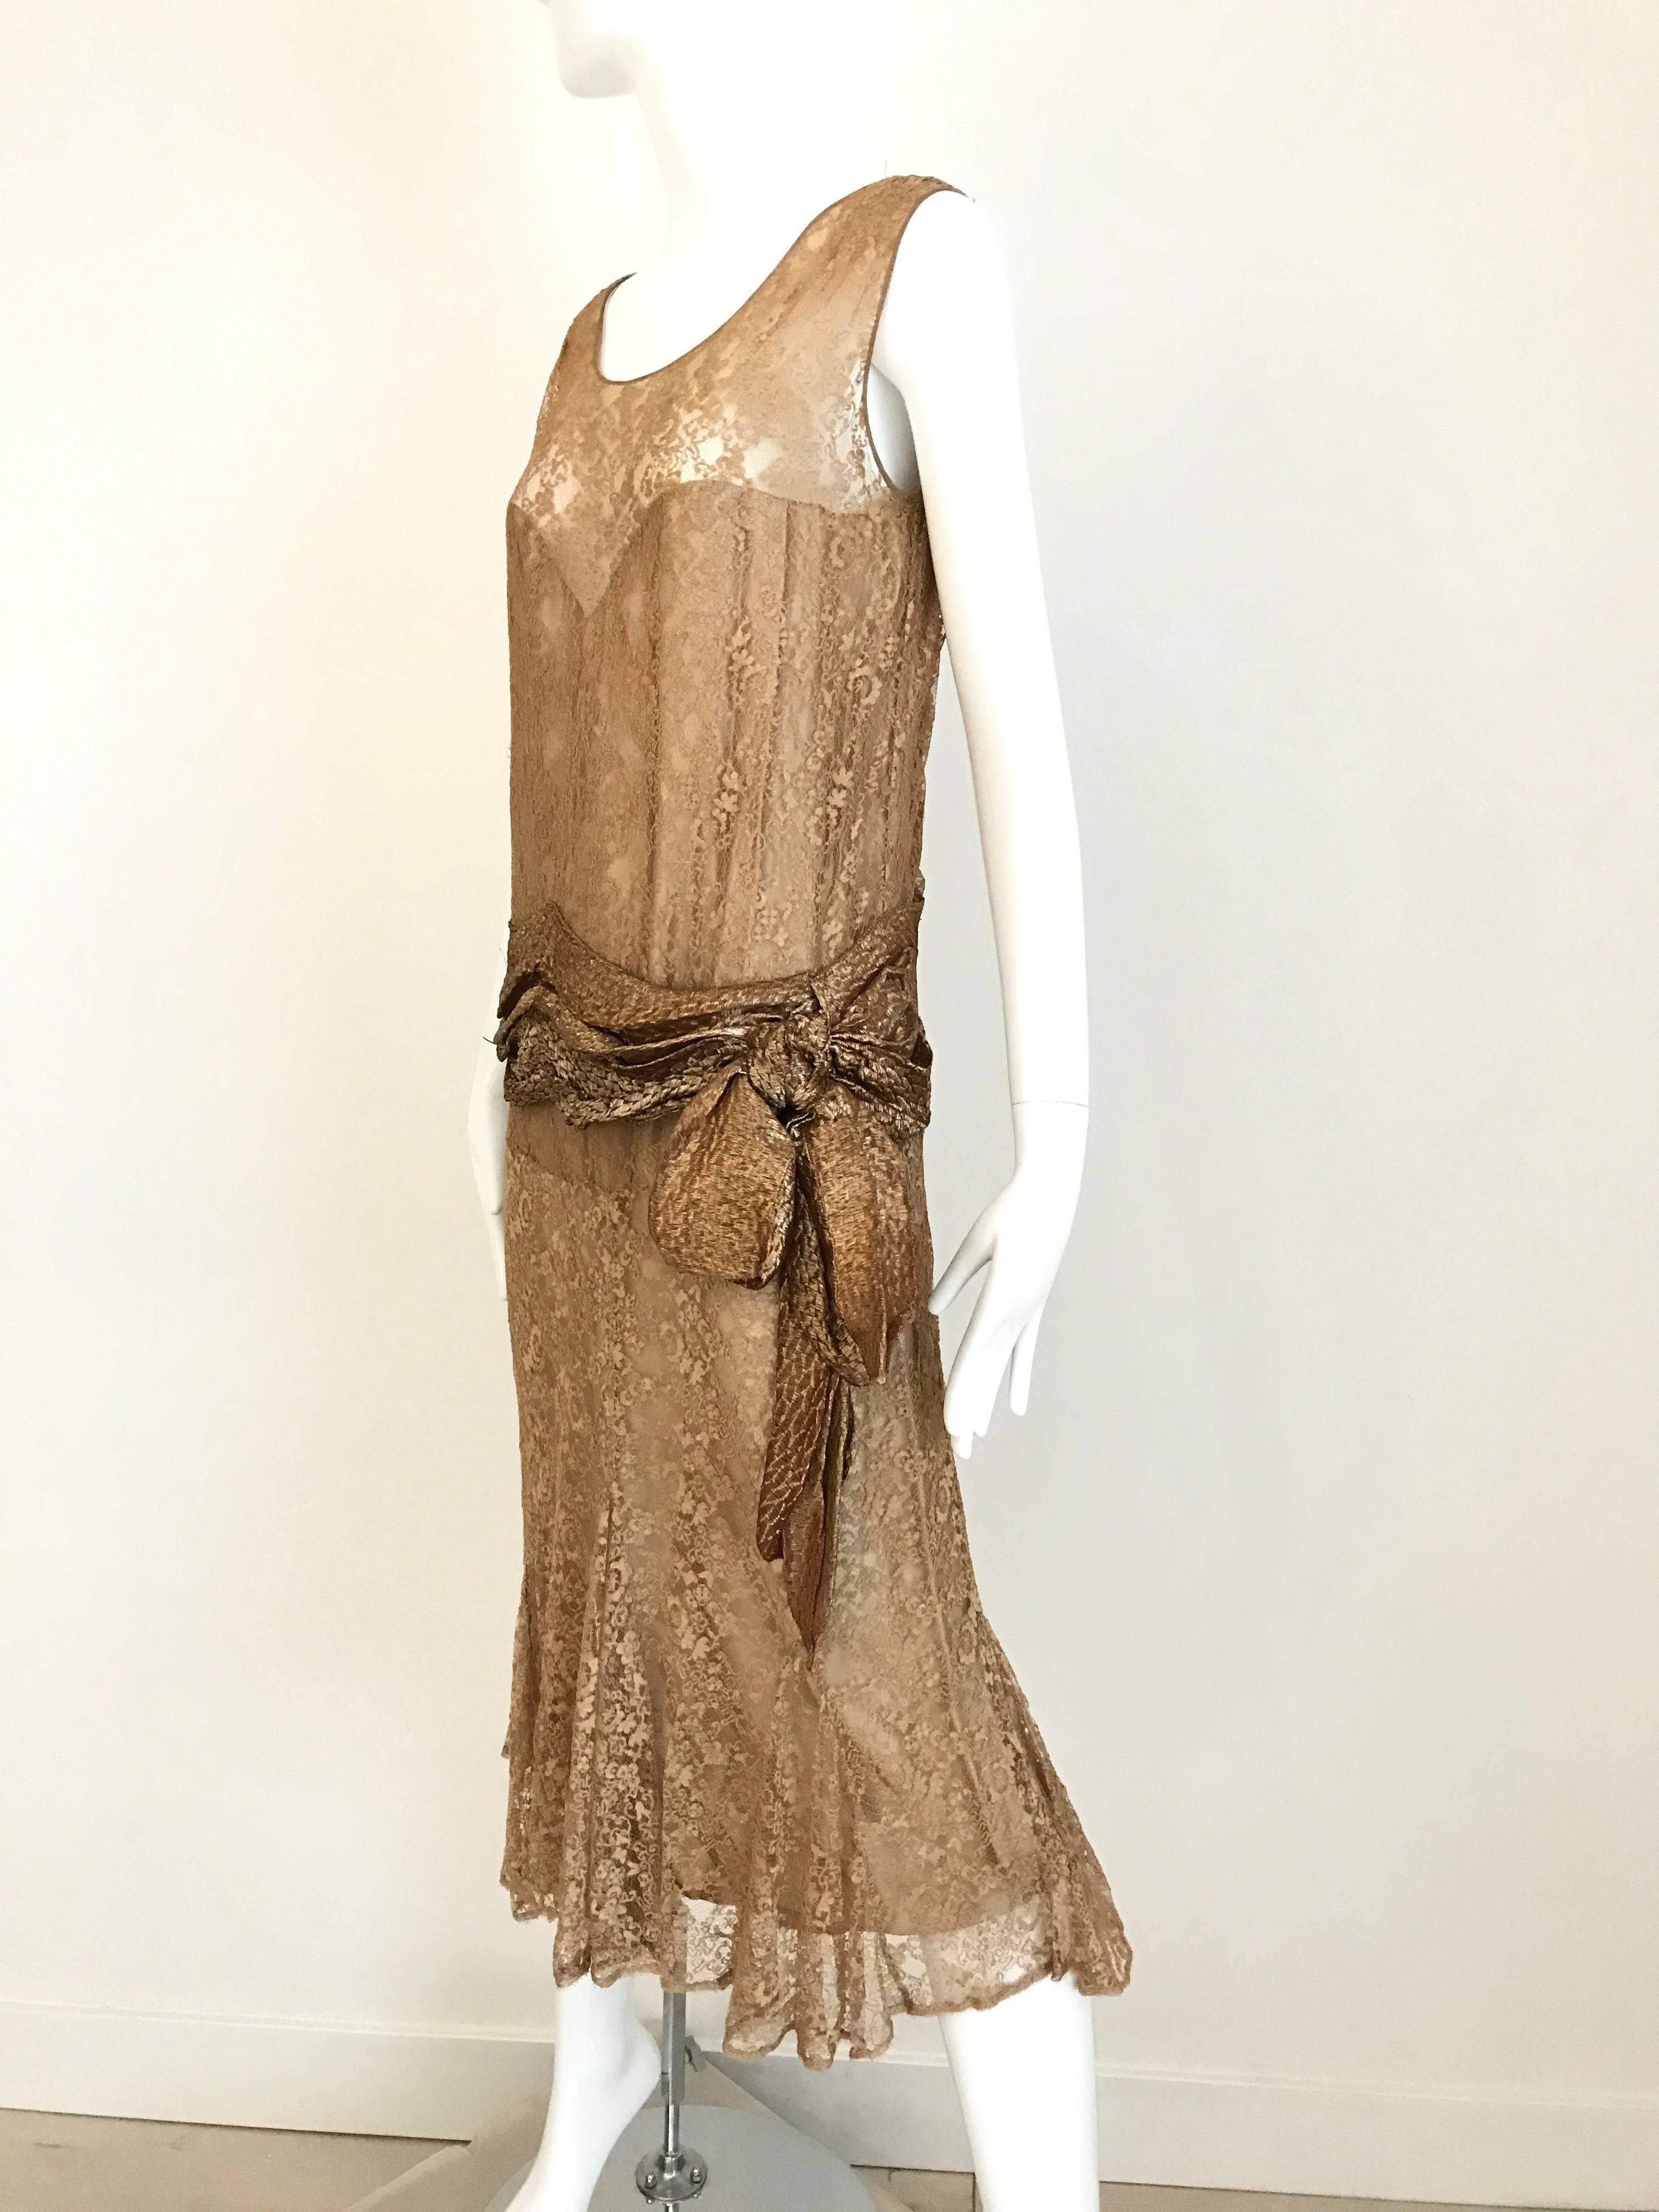 1920s Beautiful mocha brown metallic sleeveless lace flapper cocktail dress.
Fit Size: 6
Bust 38 inch / Waist 34 inch / Hip 34 inch / Length 45 inch
